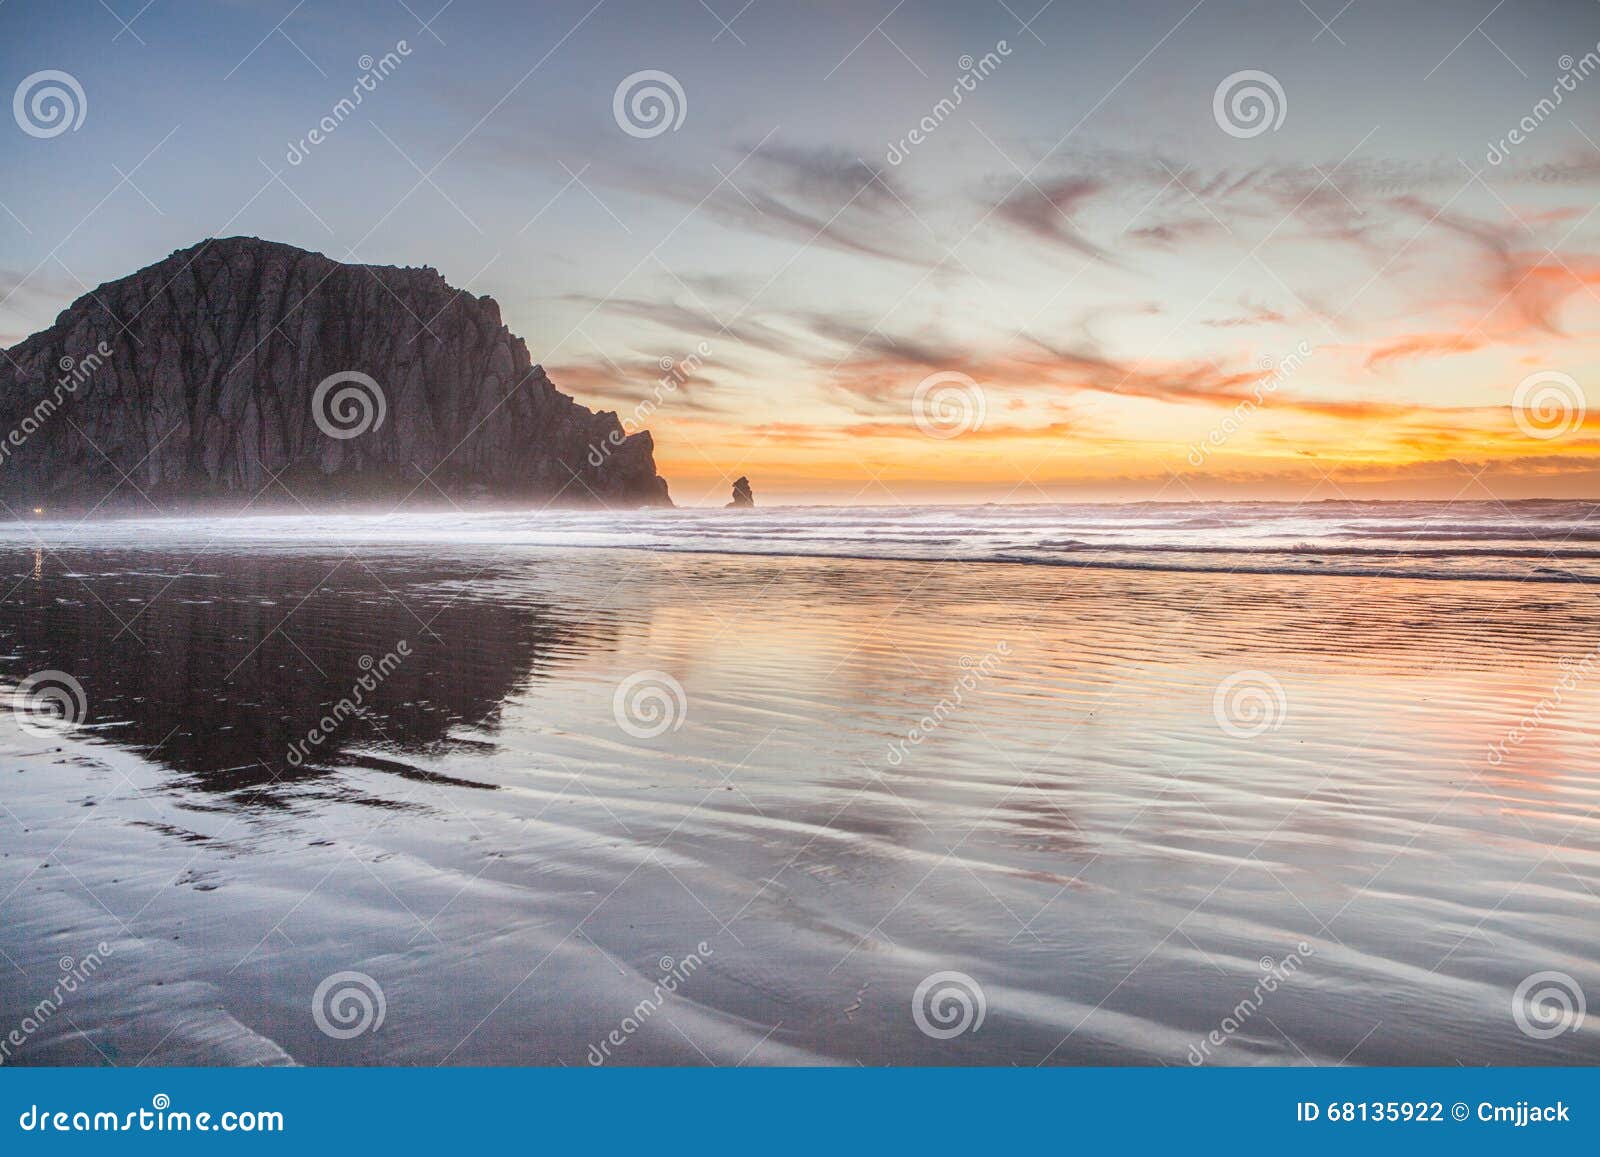 morro bay rock and beach in the sunset evening